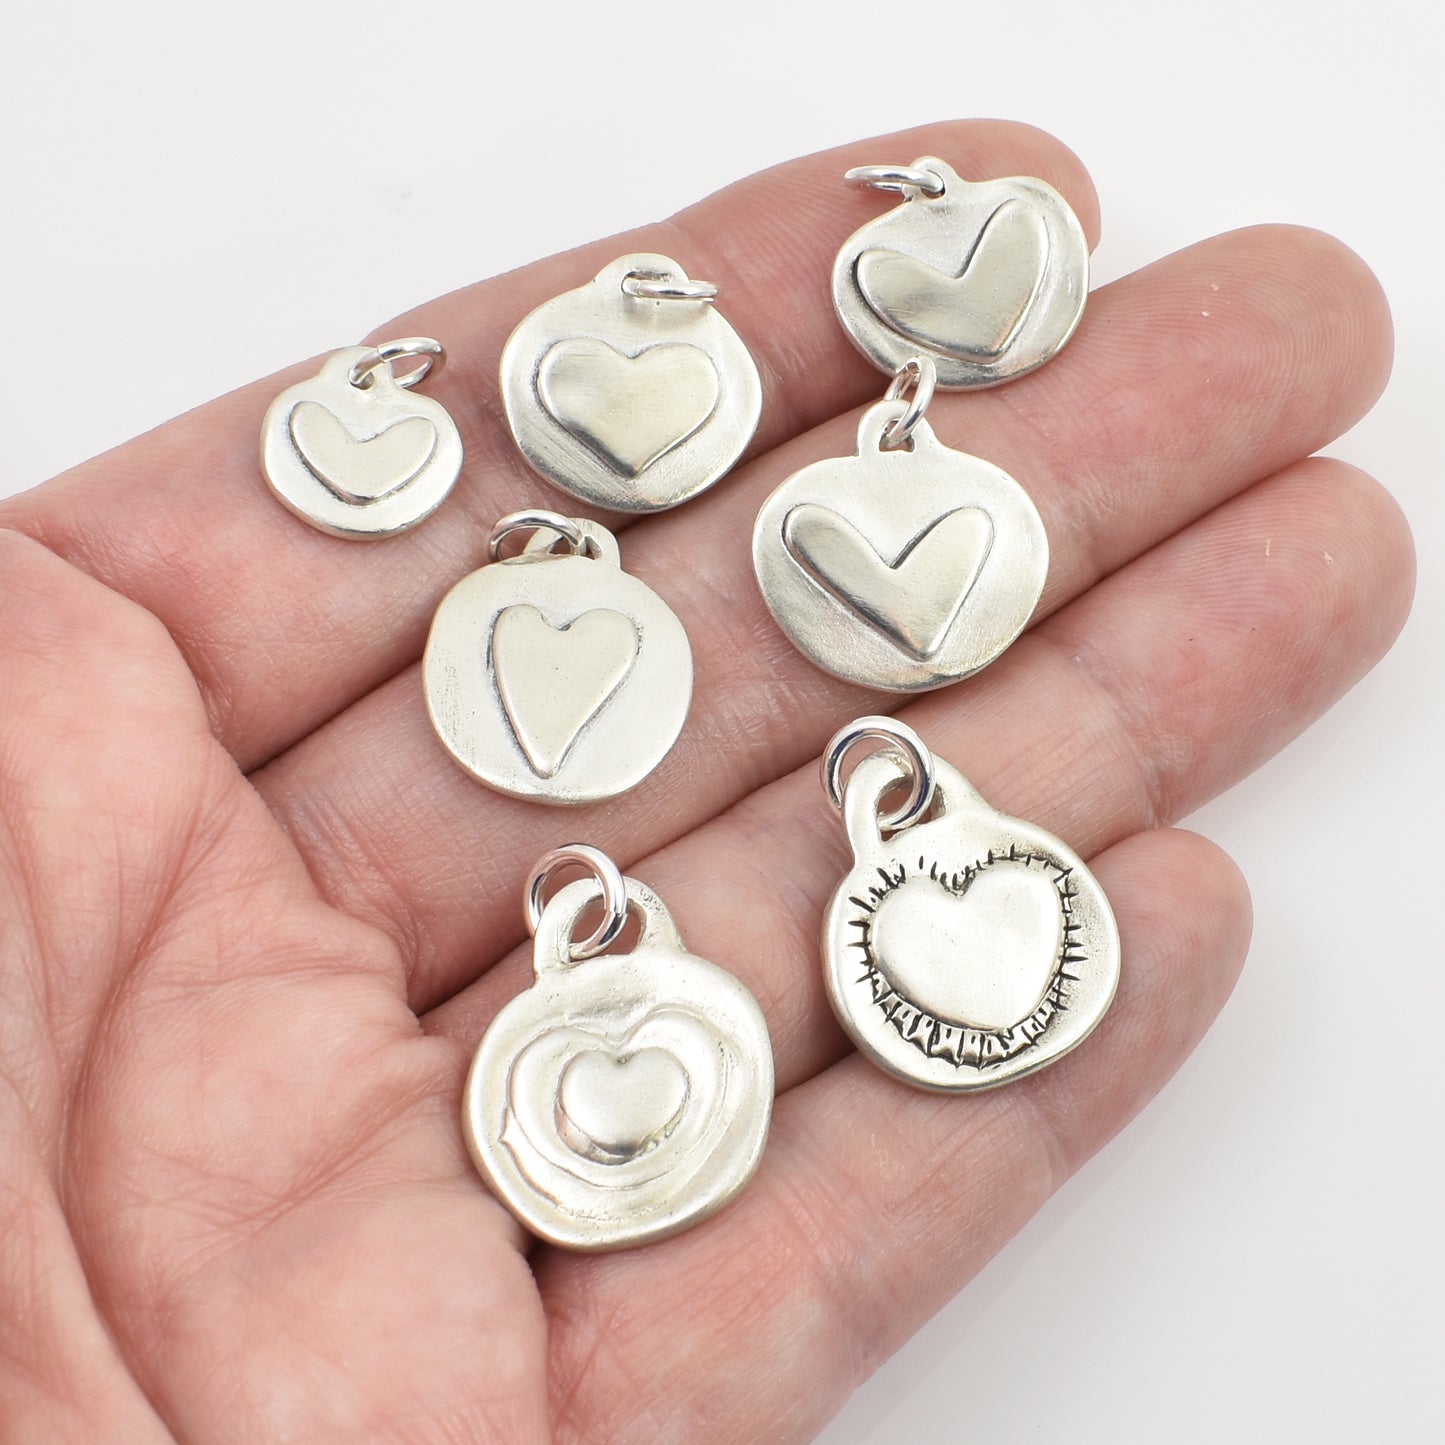 Timeless Hearts - Hearts on Circles - All Charms shown on hand for size reference